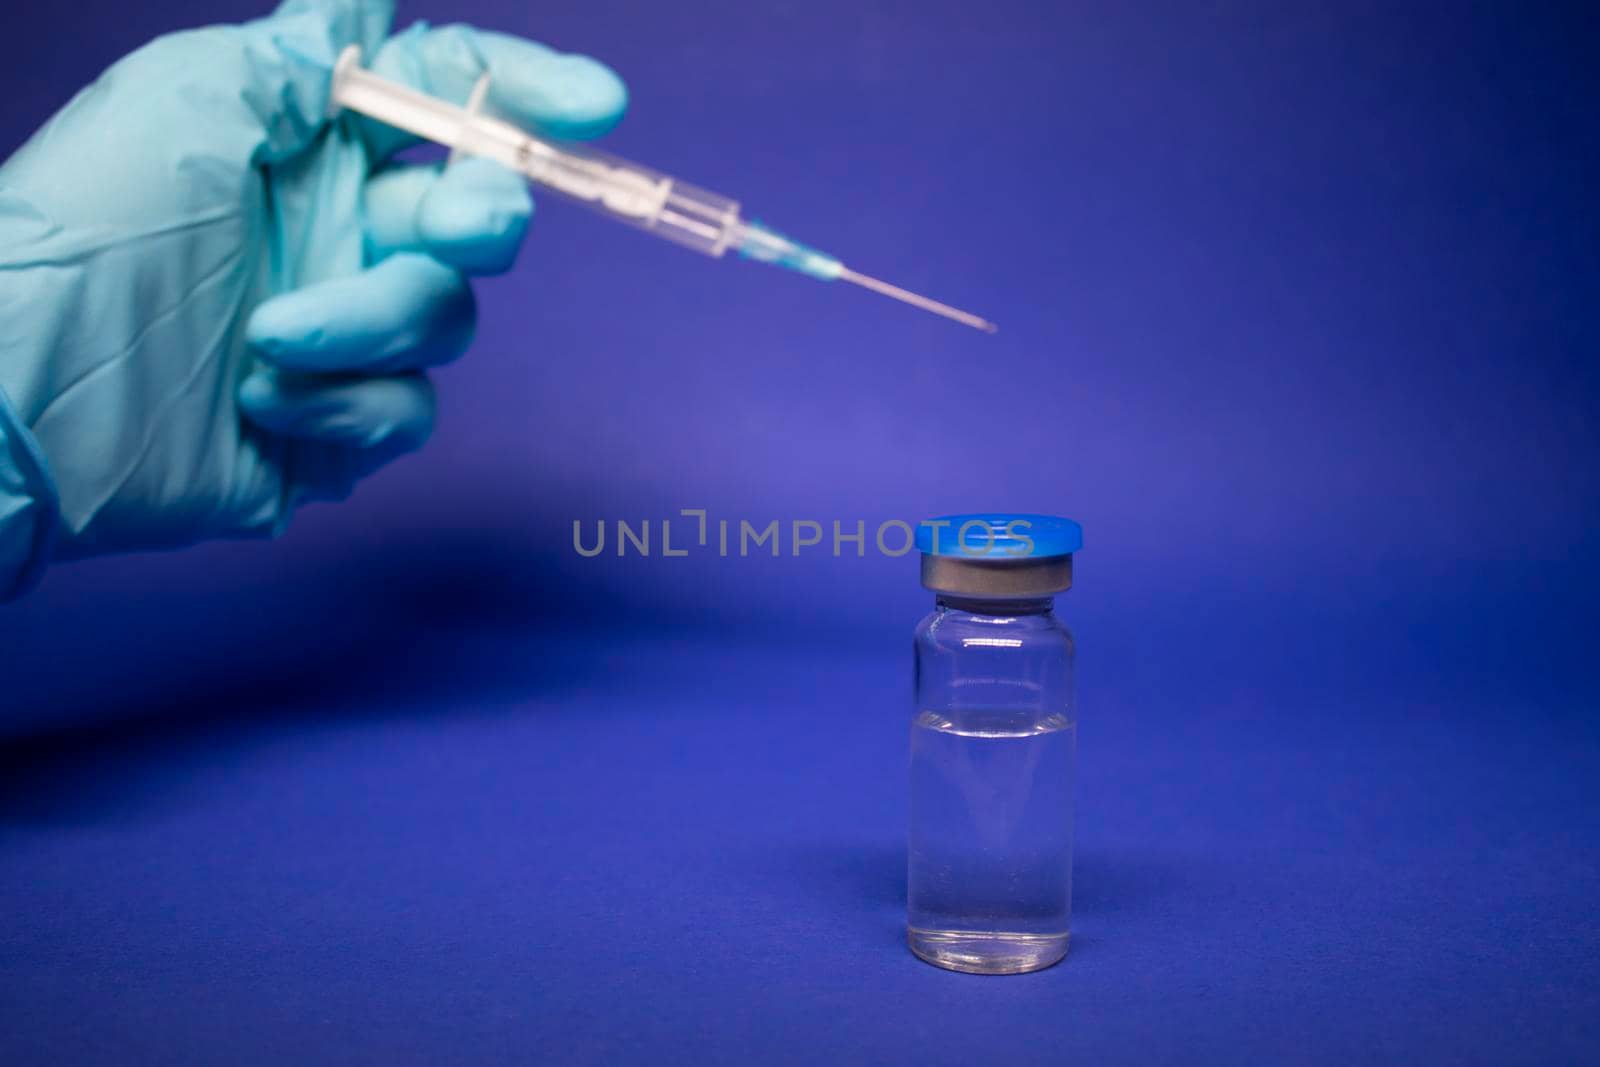 Development of coronavirus vaccine COVID-19. medical syringe with injection needle in blue medical glove near bottle phial with no label. isolated on blue background. cure. copy space